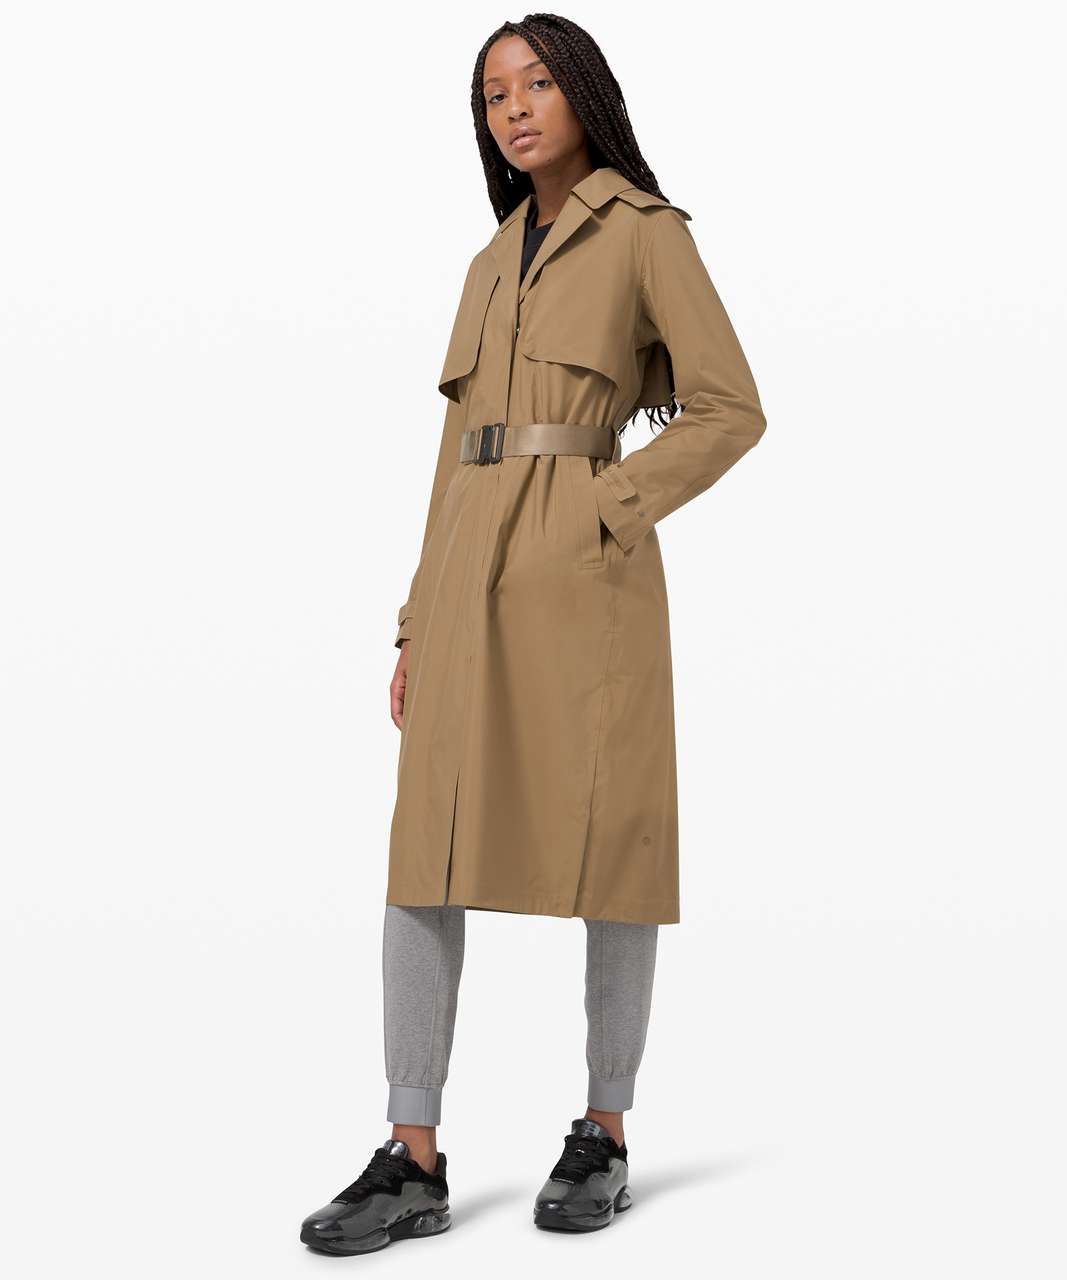 Lululemon Always There Trench Coat - Frontier